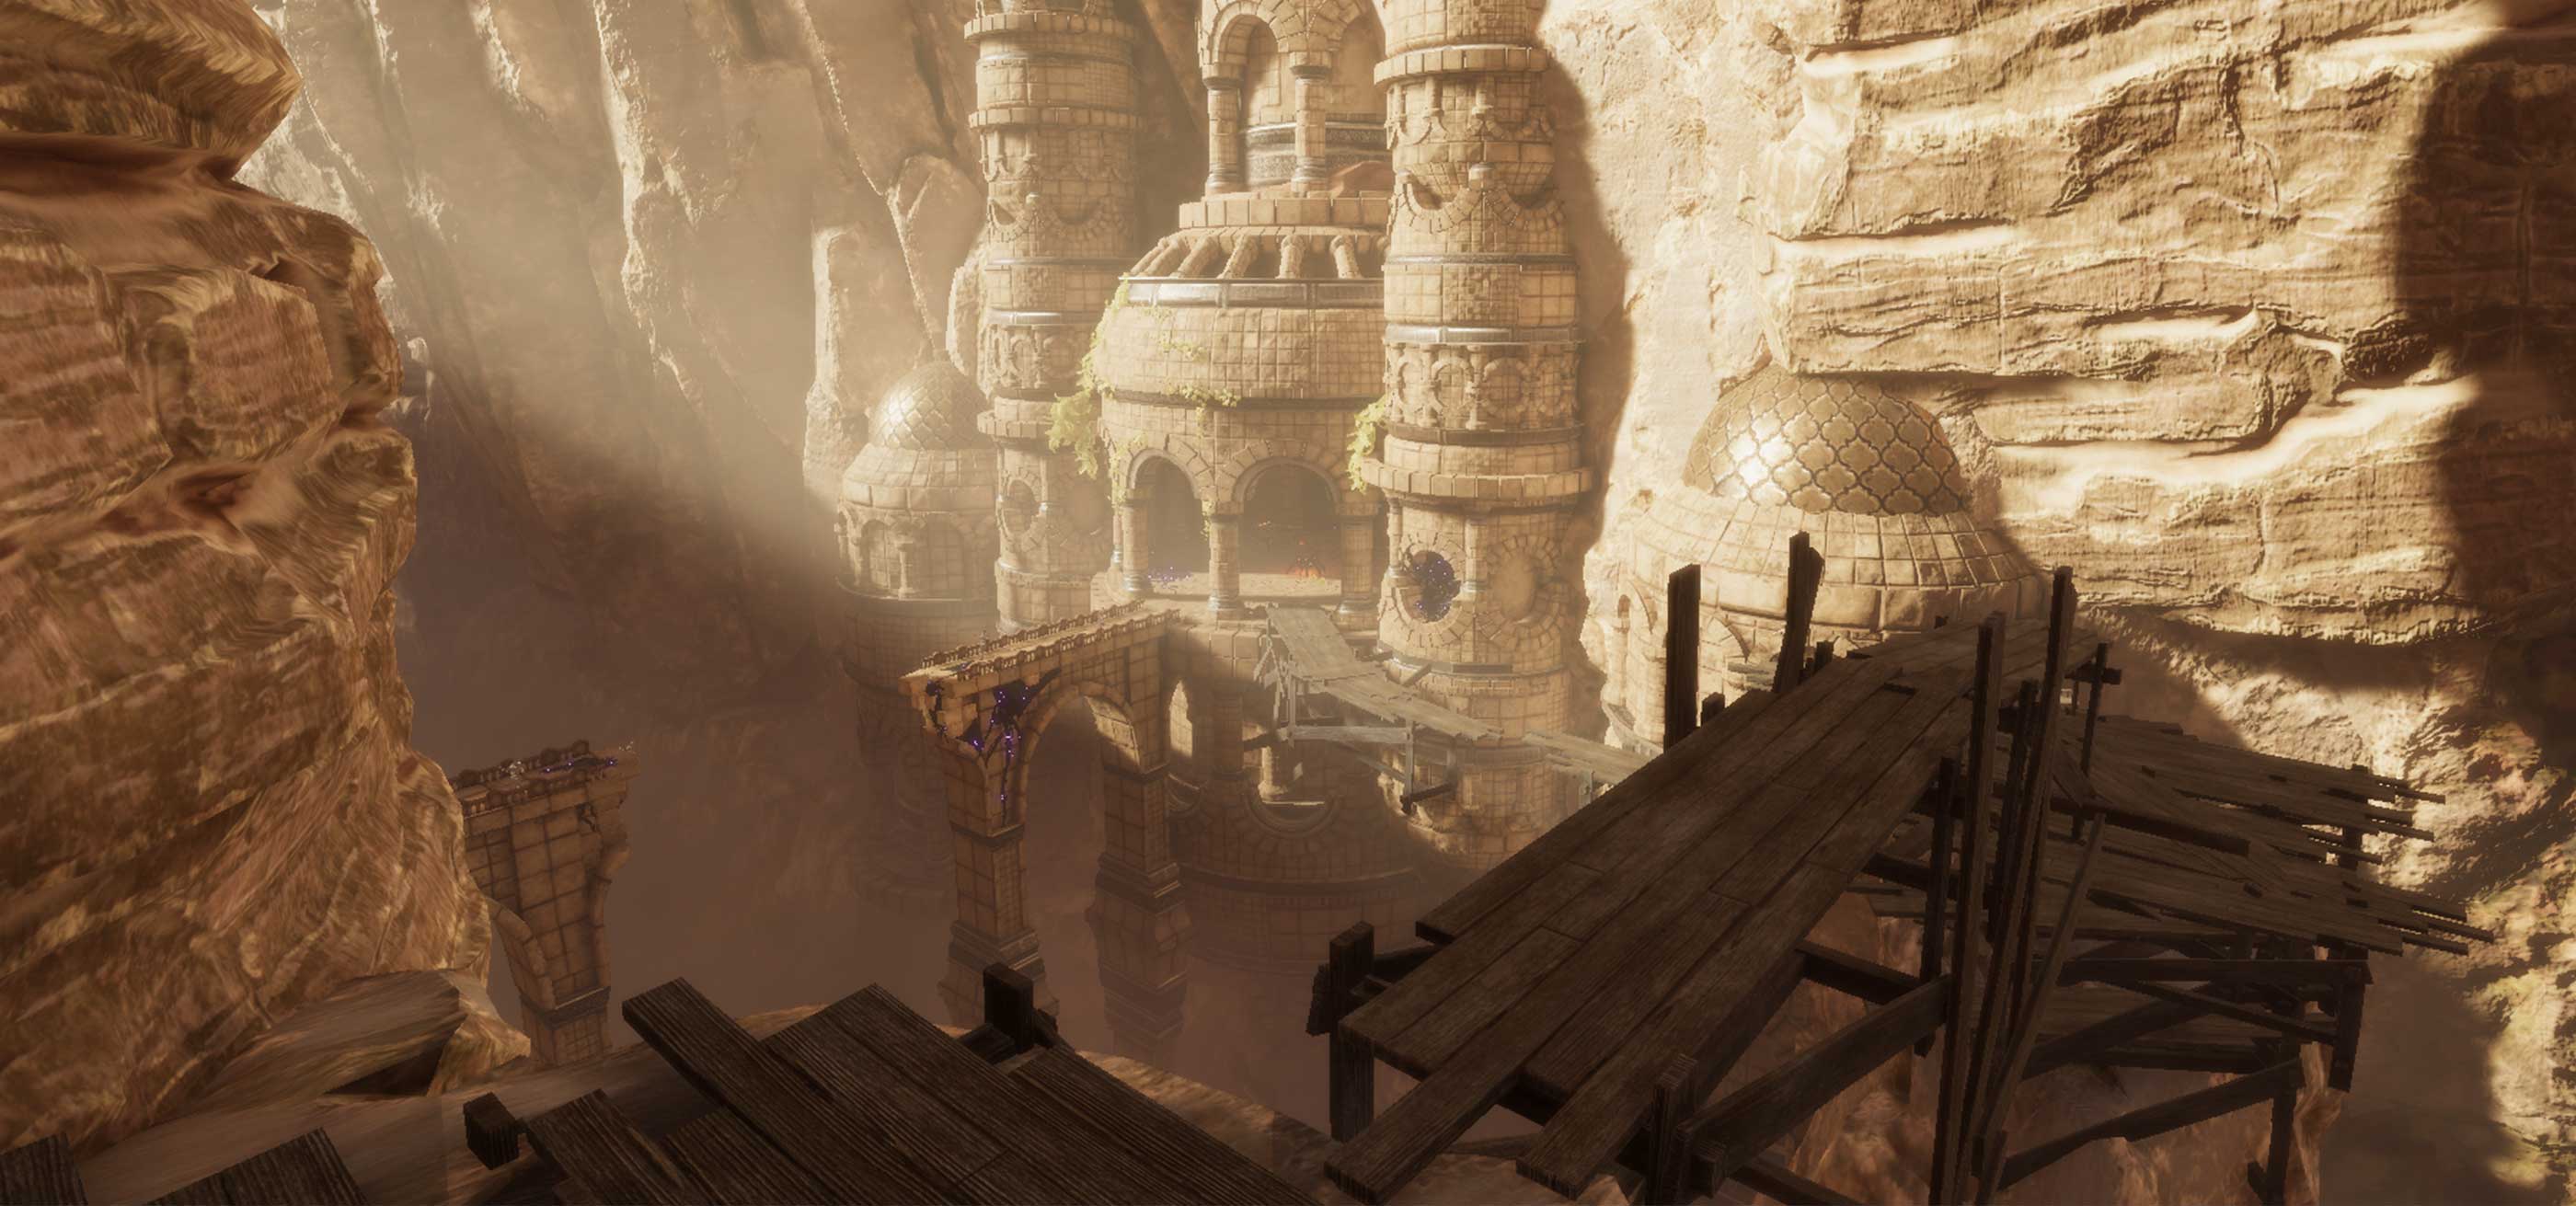 Wooden walkways line the desert canyon amid ancient and crumbling ruins.